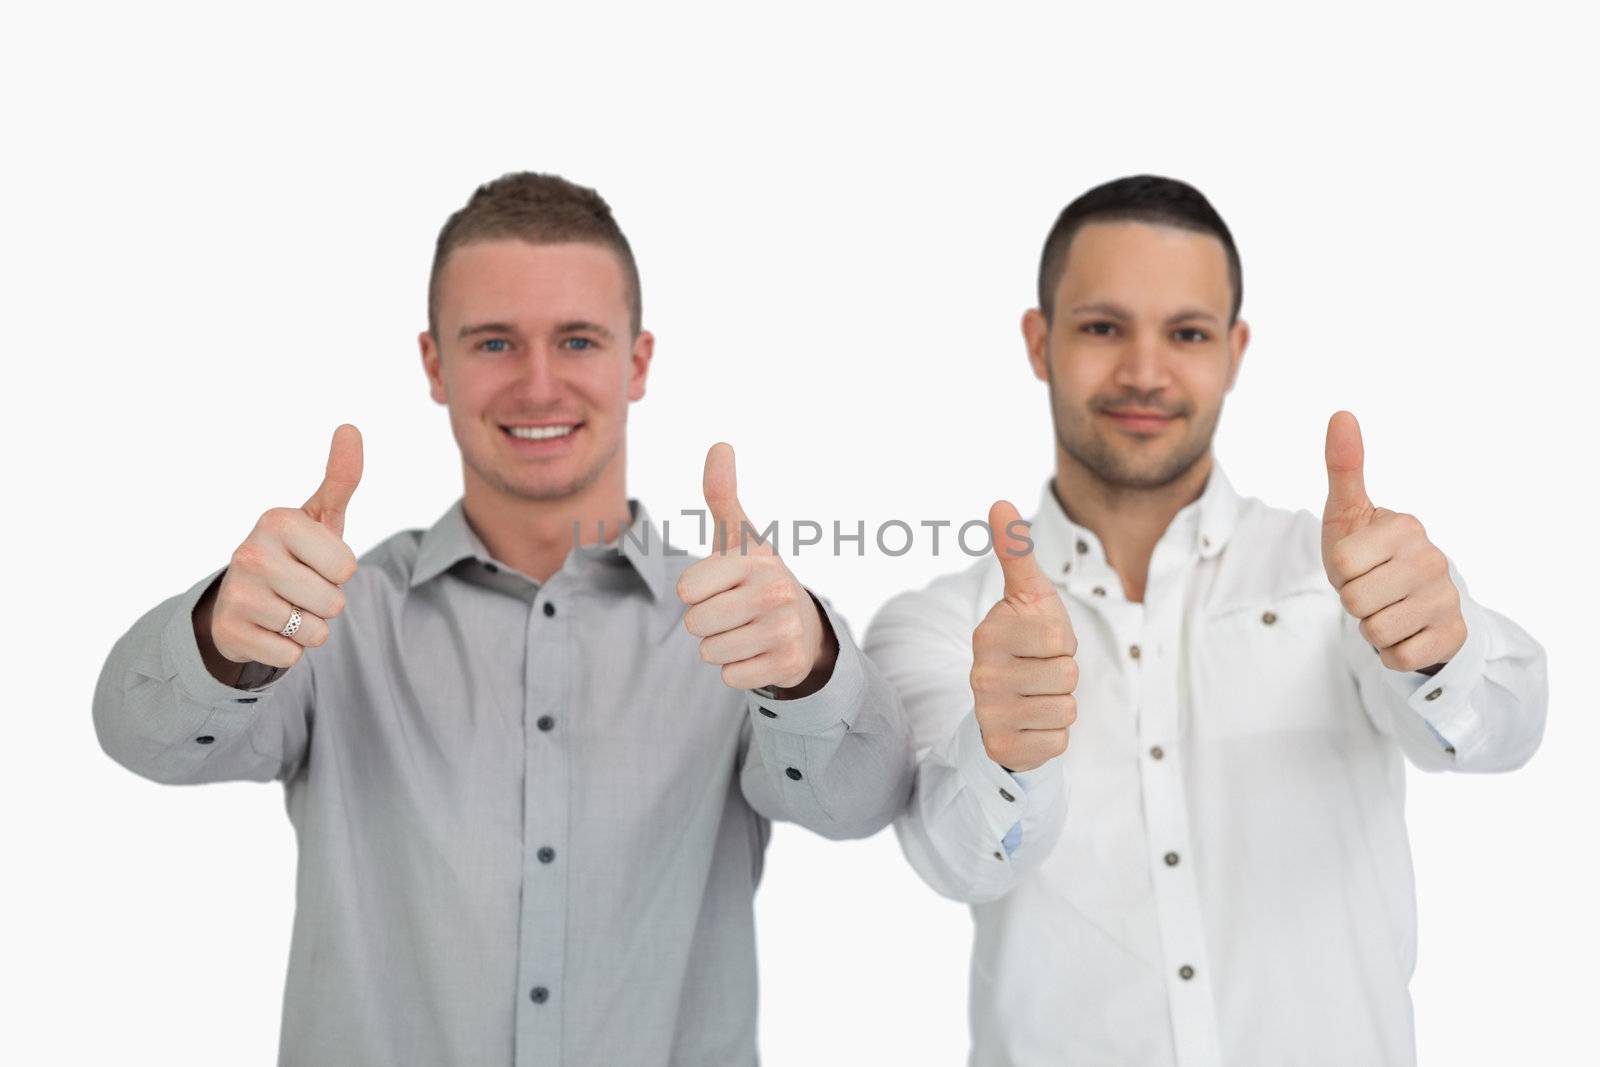 Two men putting their thumbs up against a white background